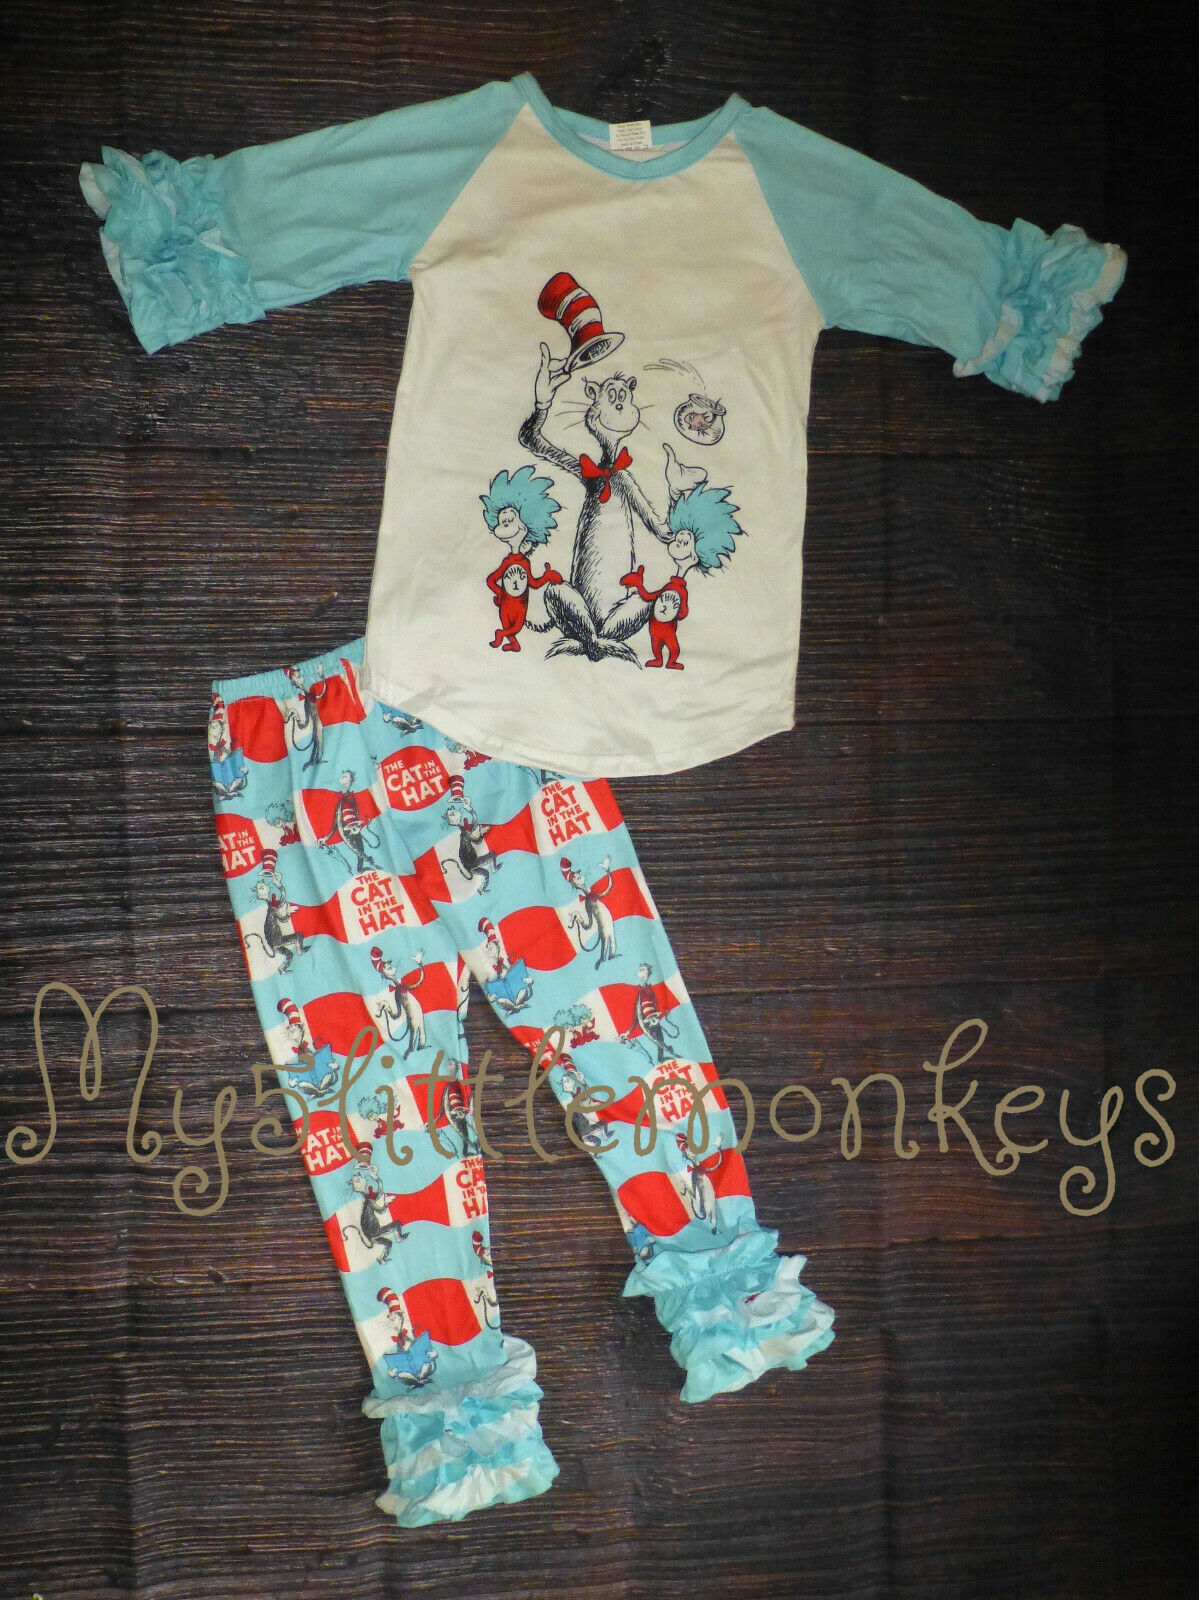 NEW Dr Seuss Cat in the Hat Shirt & Ruffle Leggings Girls Boutique Outfit Set  - $5.99 - $20.99